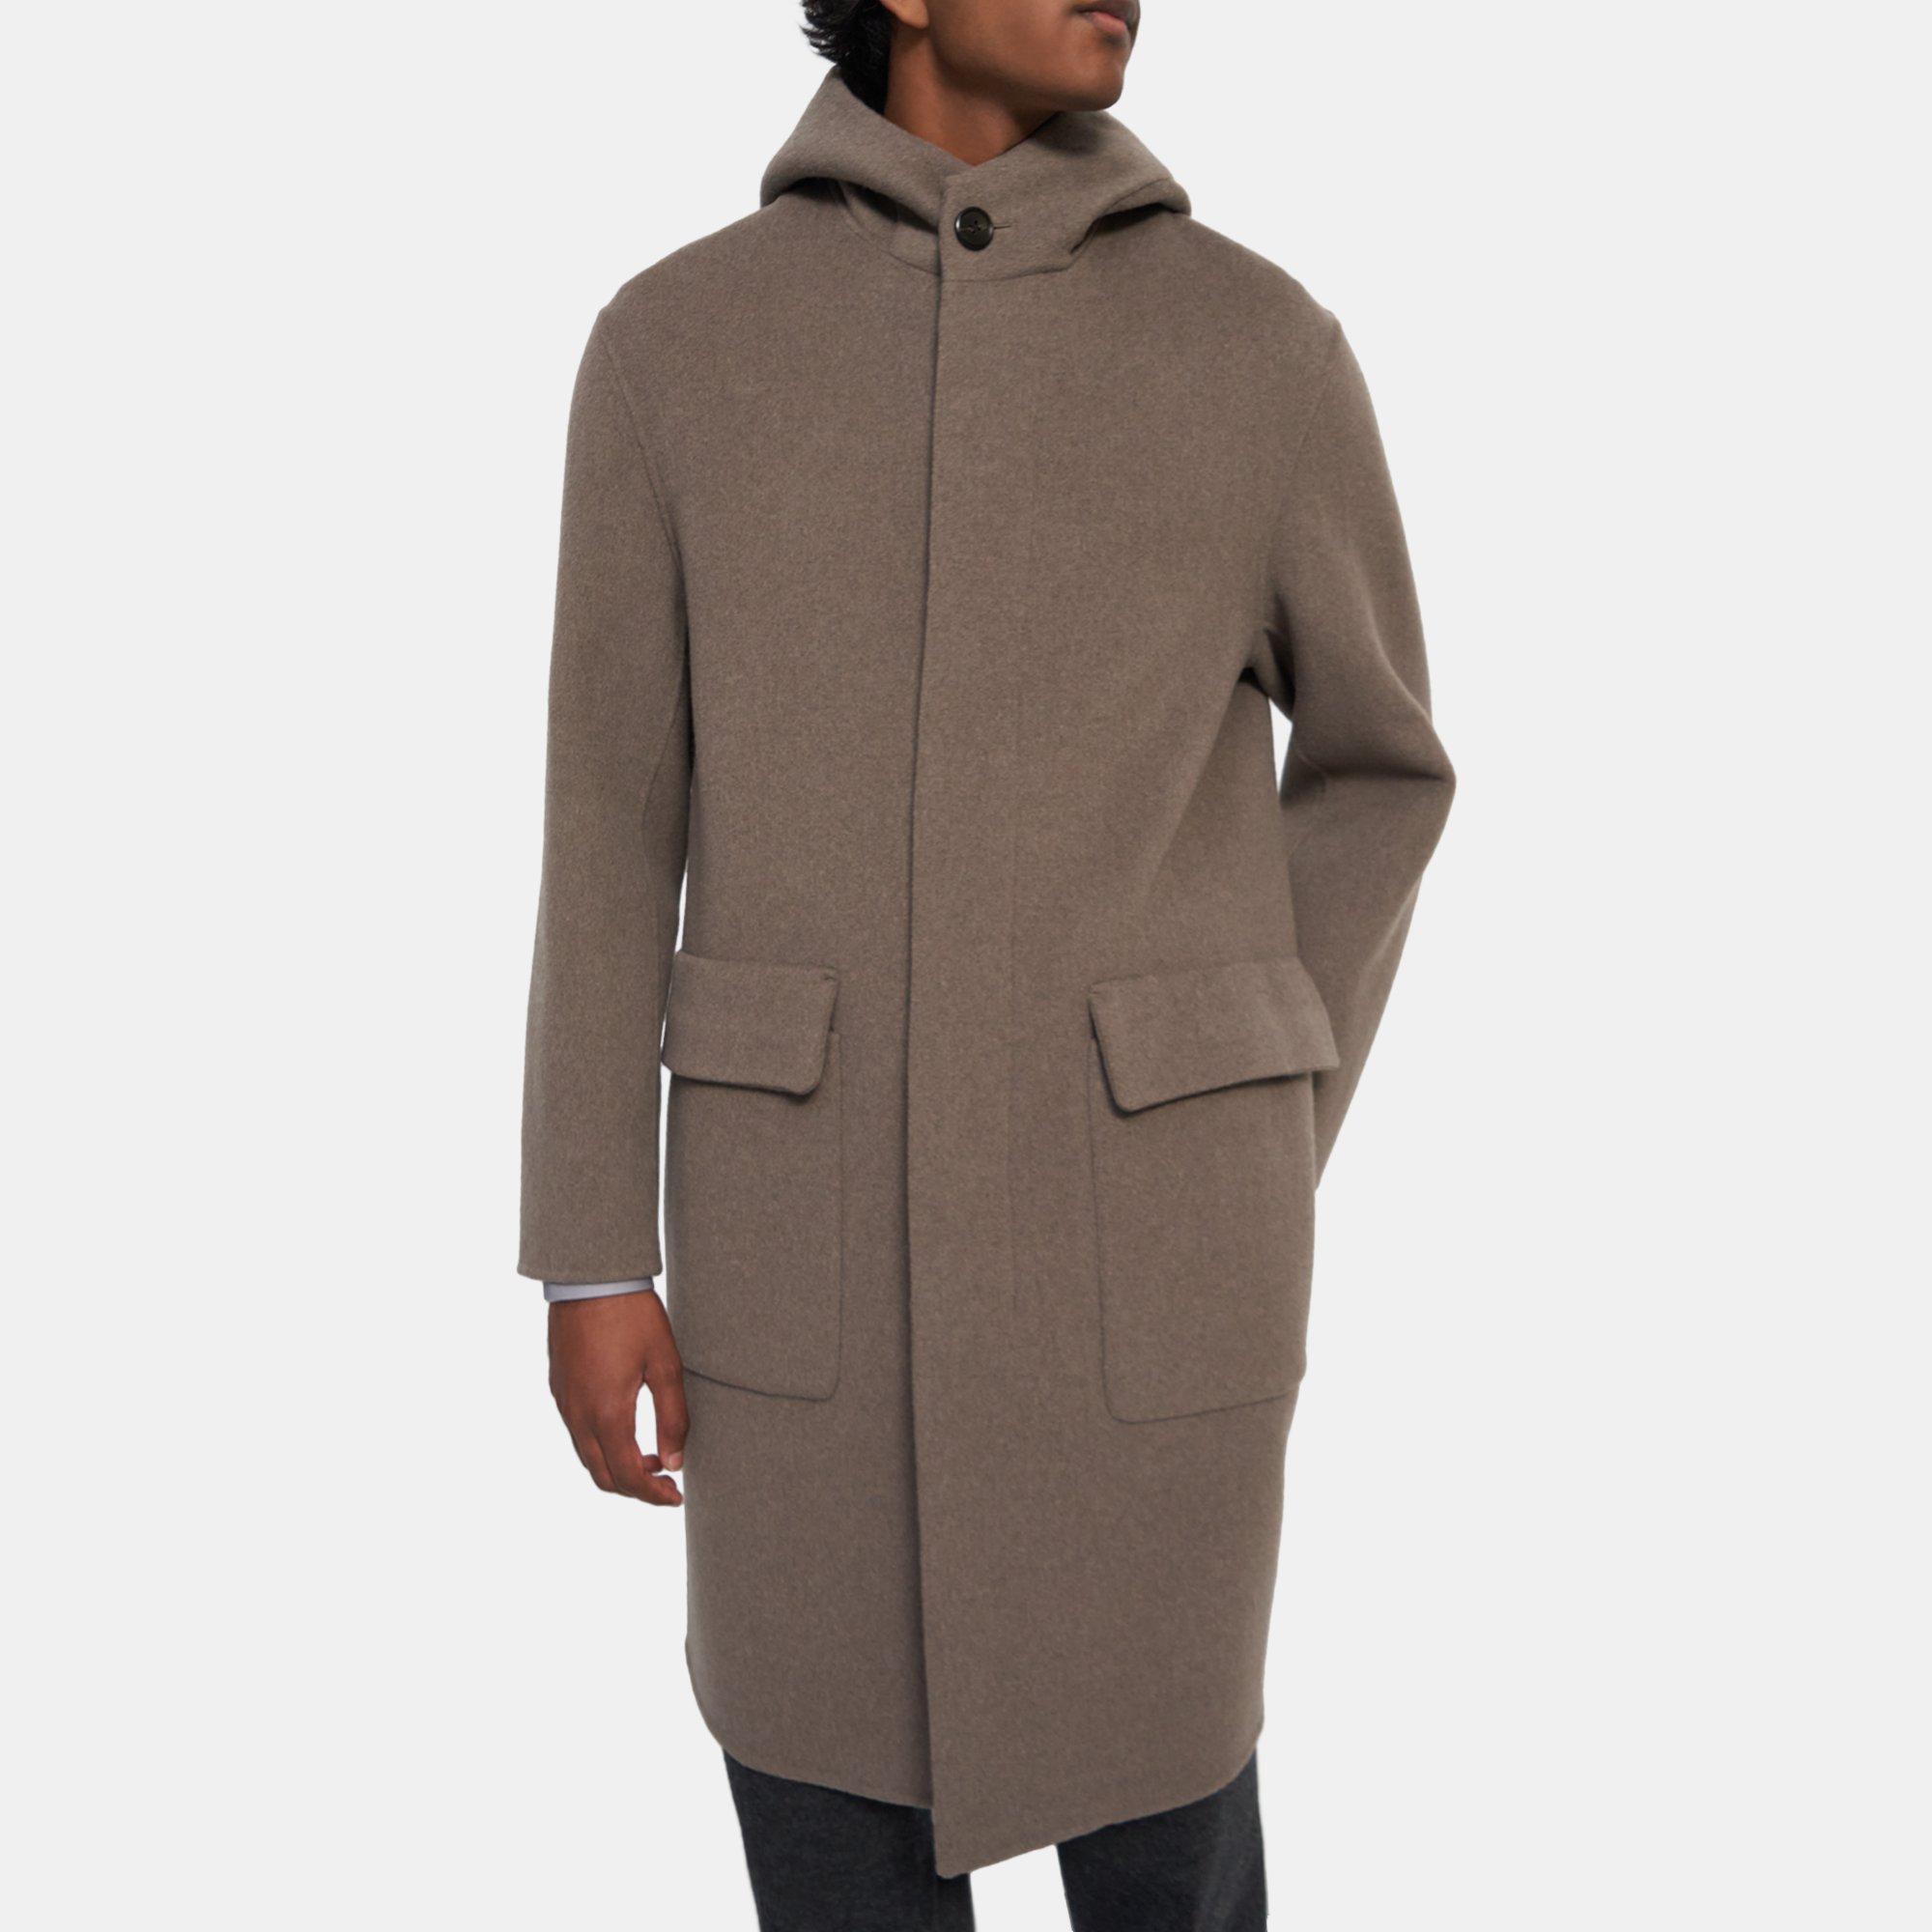 Theory Coats & Outerwear  Thompson Hooded Coat In Double-Face